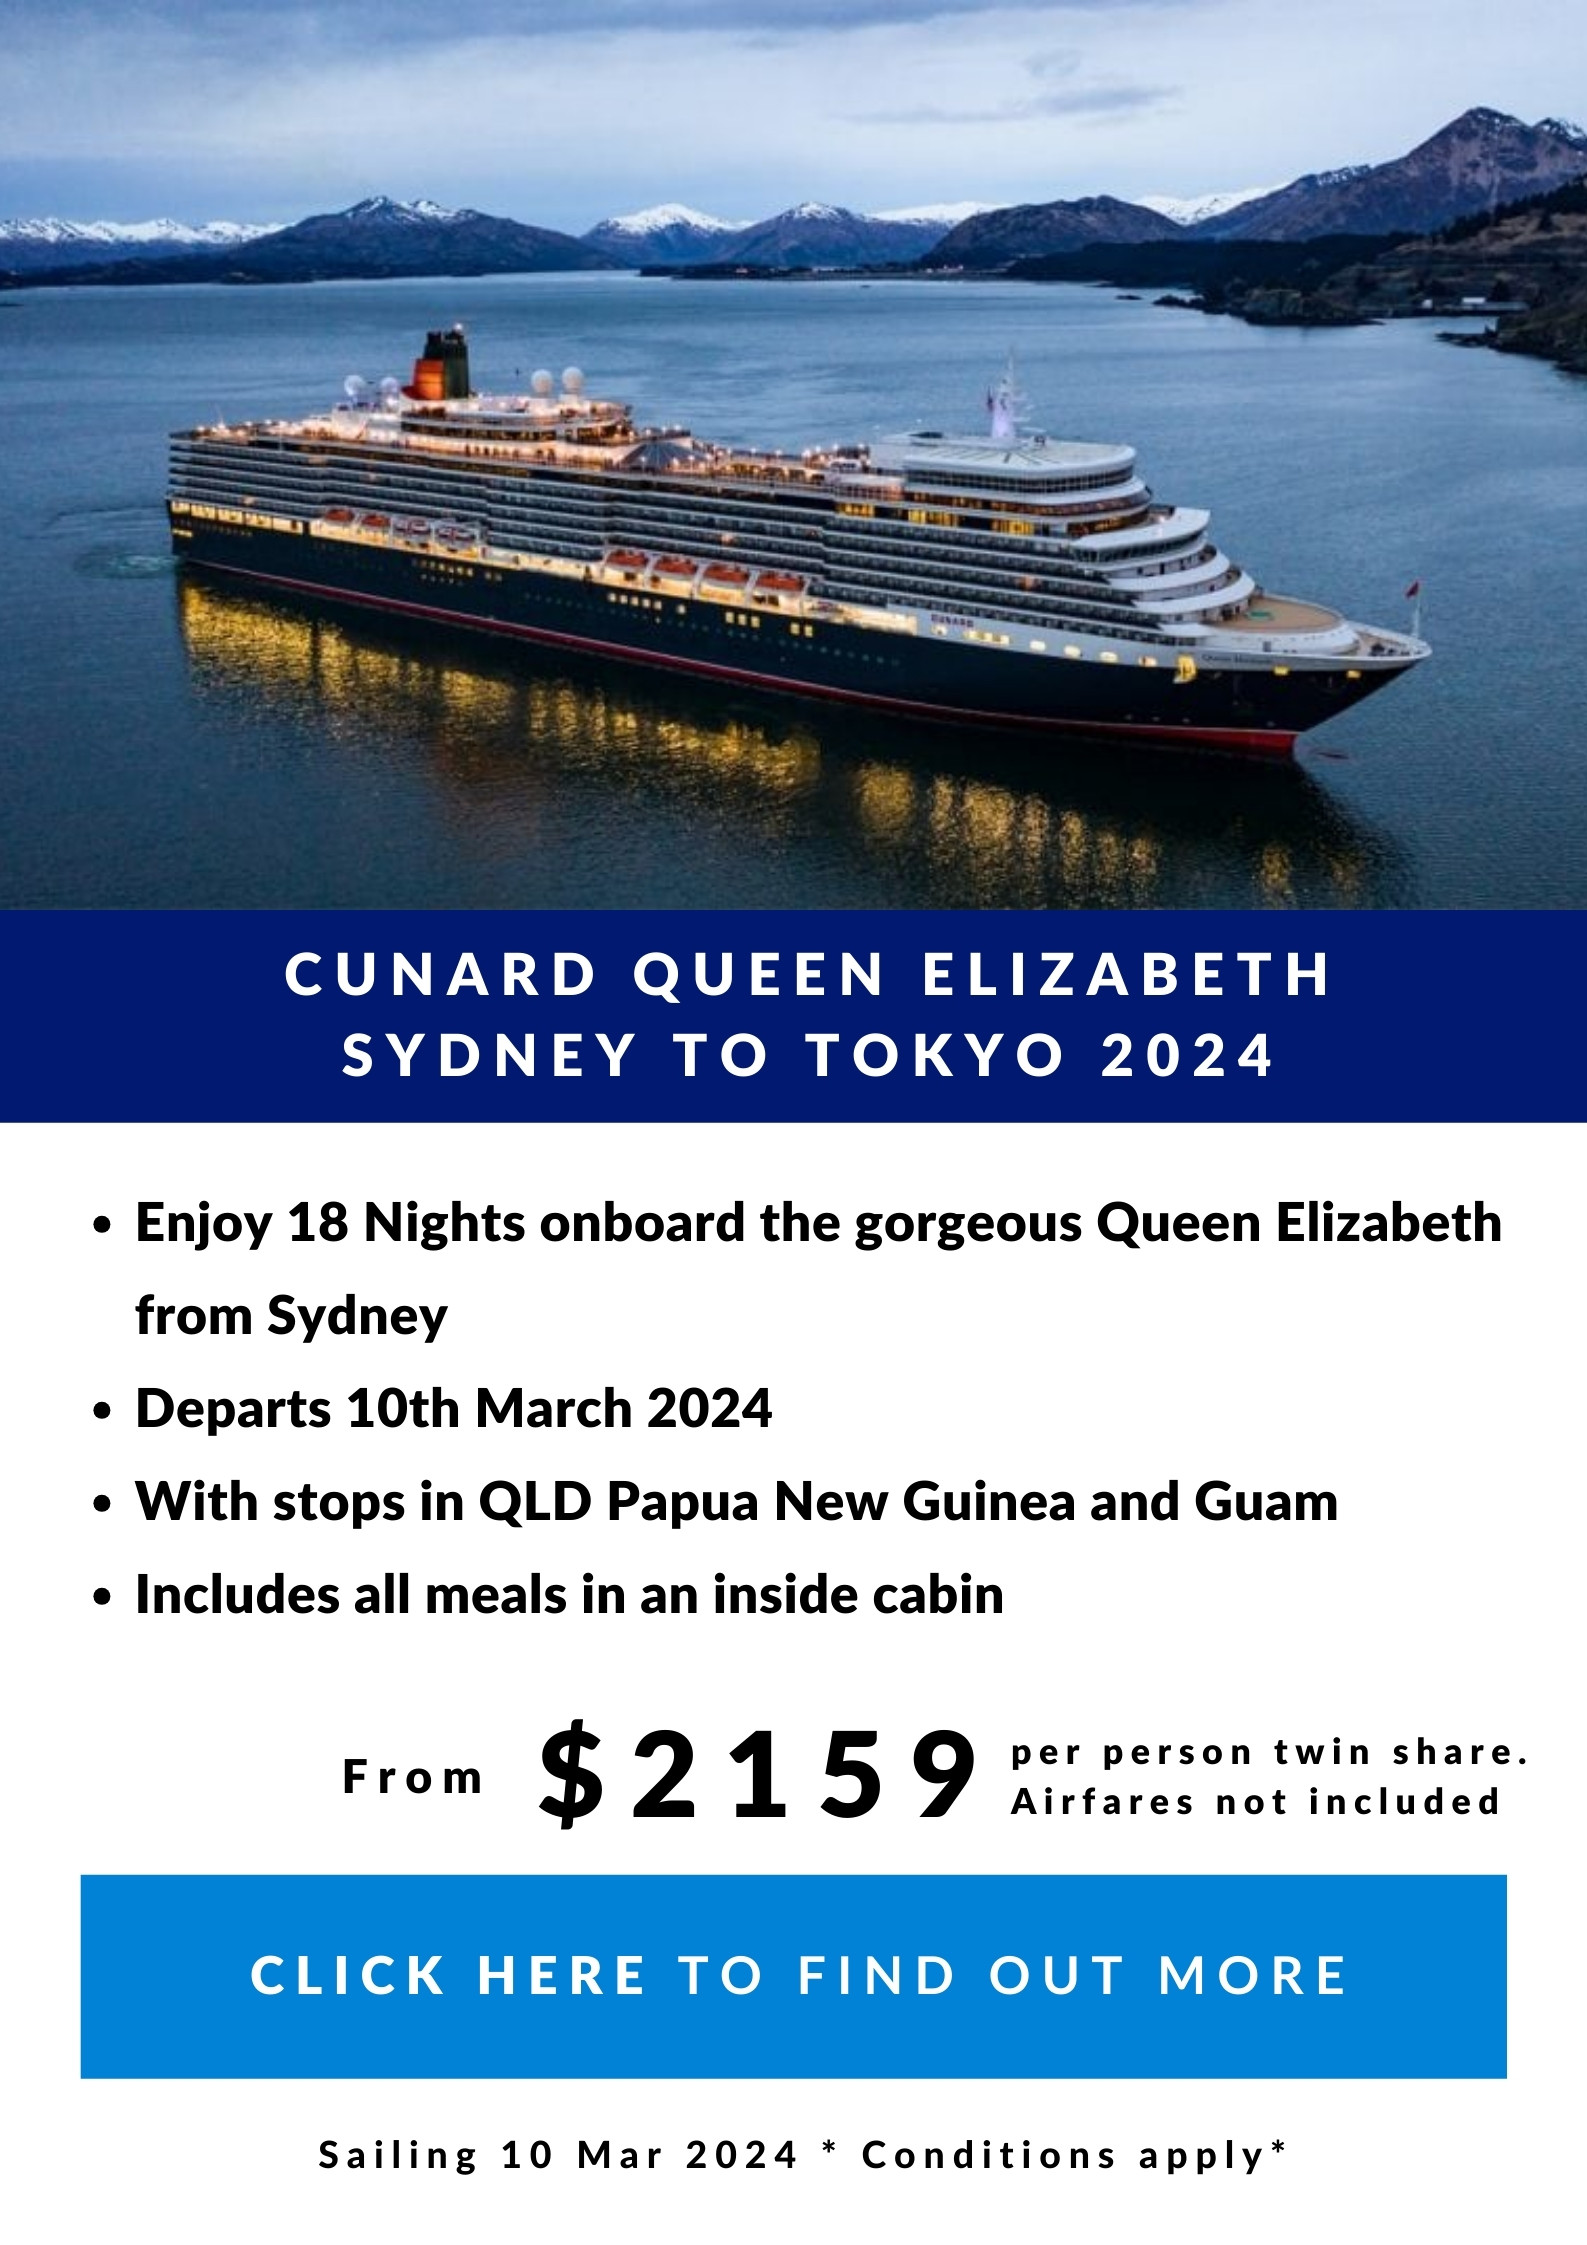 From $3899 per person twin share